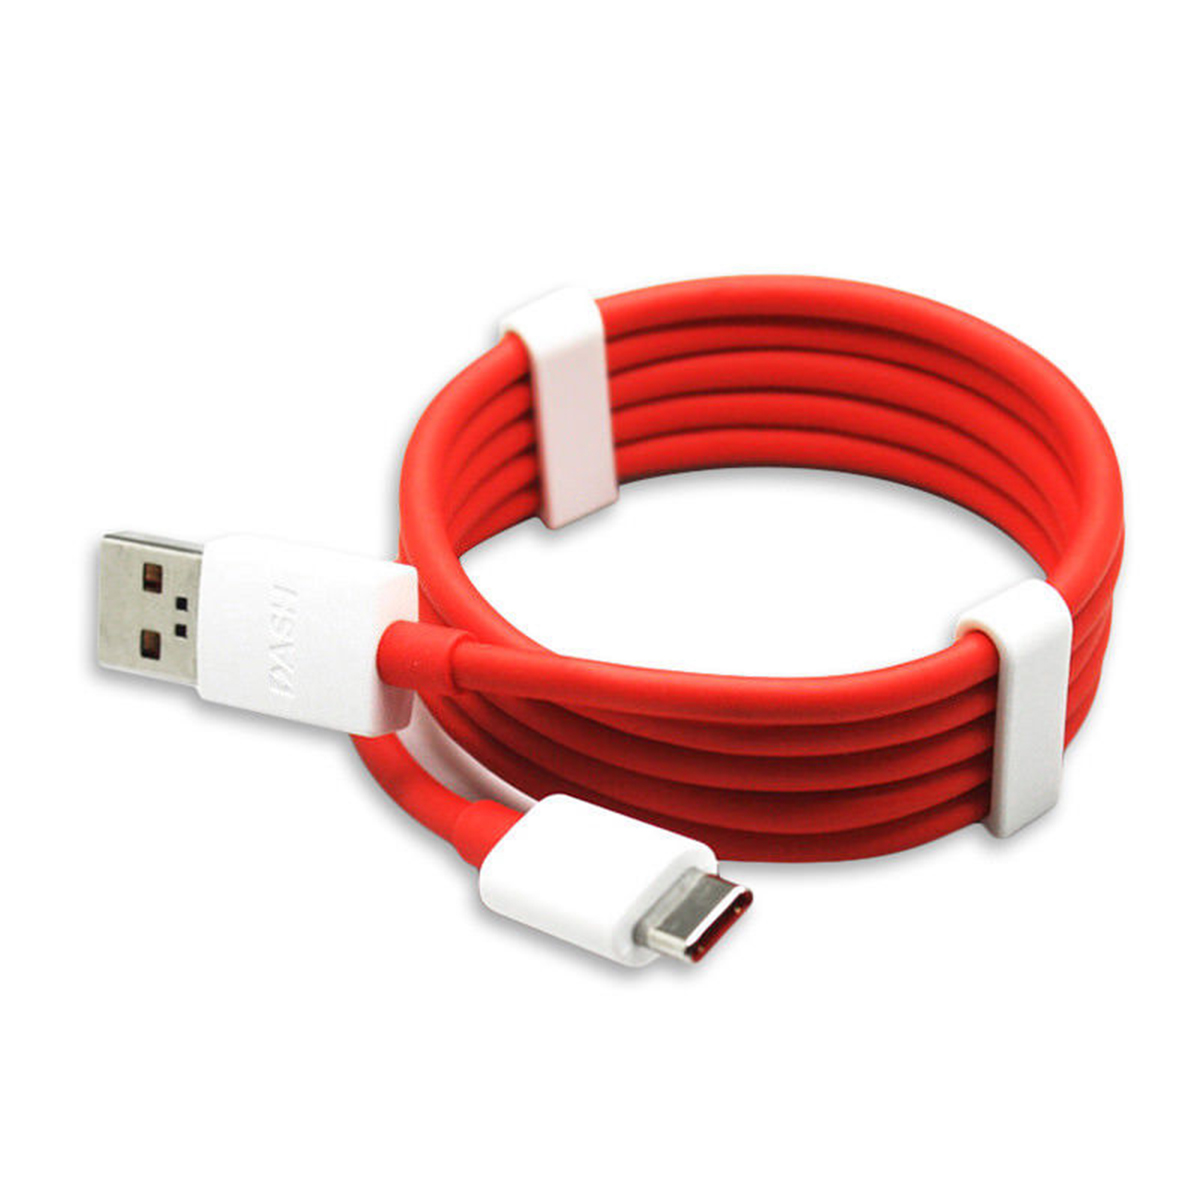 

Original 5V 4A Dash Fast Charging Type-C Data Cable Cord For Oneplus 5 3t 3